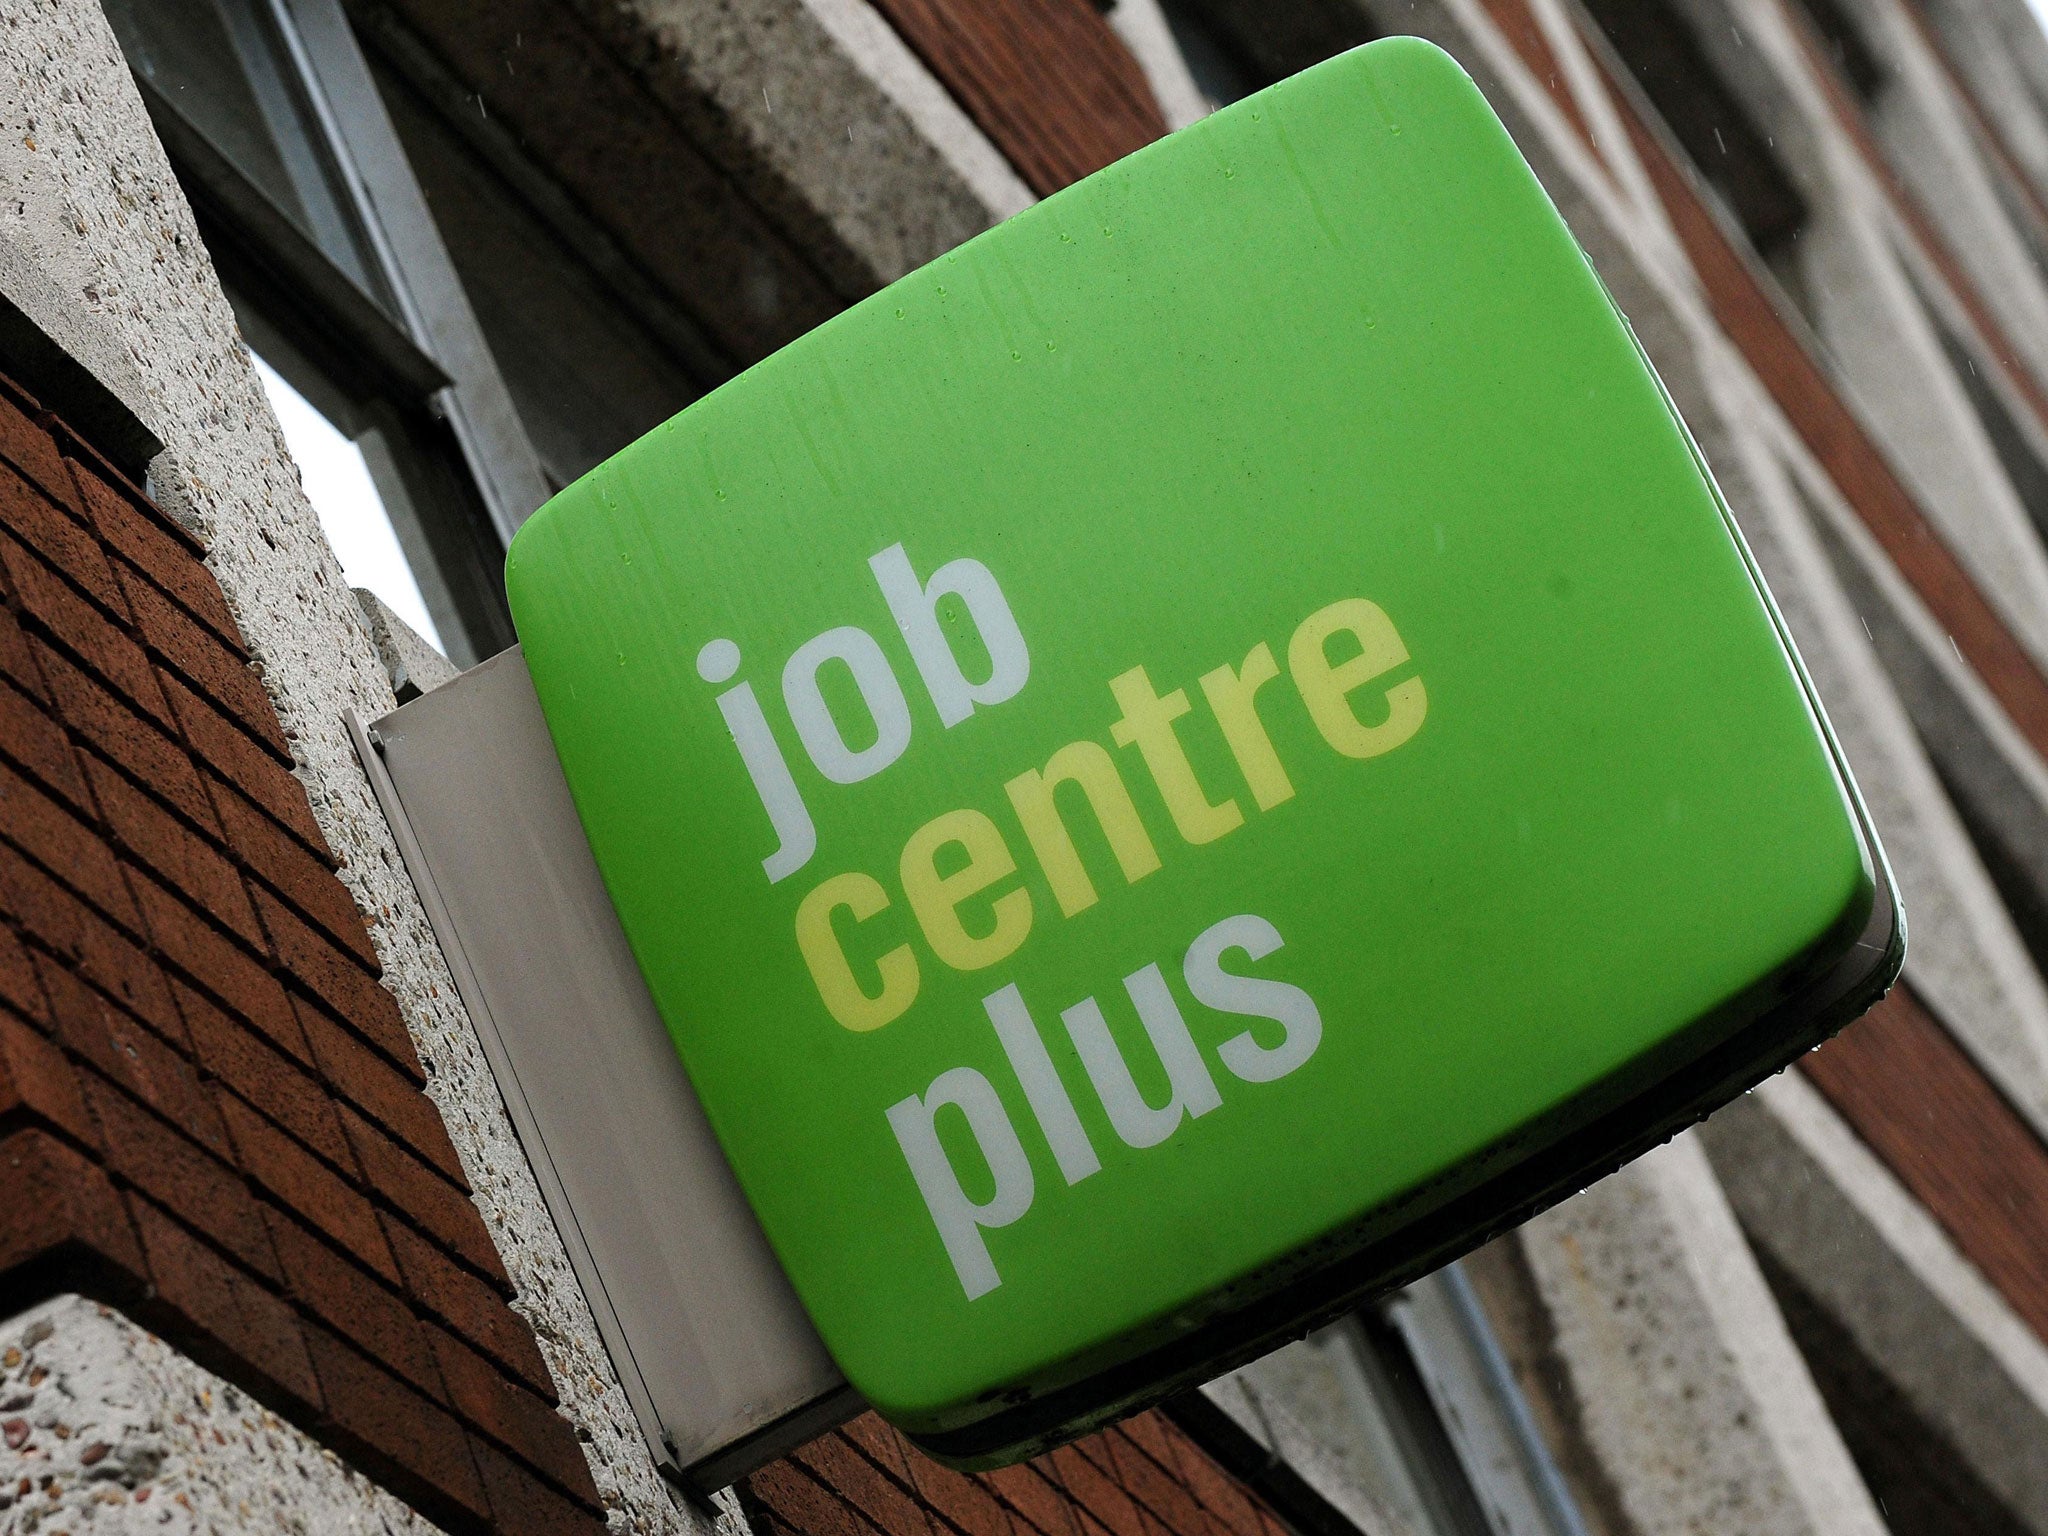 A committee of MPs said key performance indicators used by Jobcentre Plus should immediately be revised to help people into work, not just off benefits